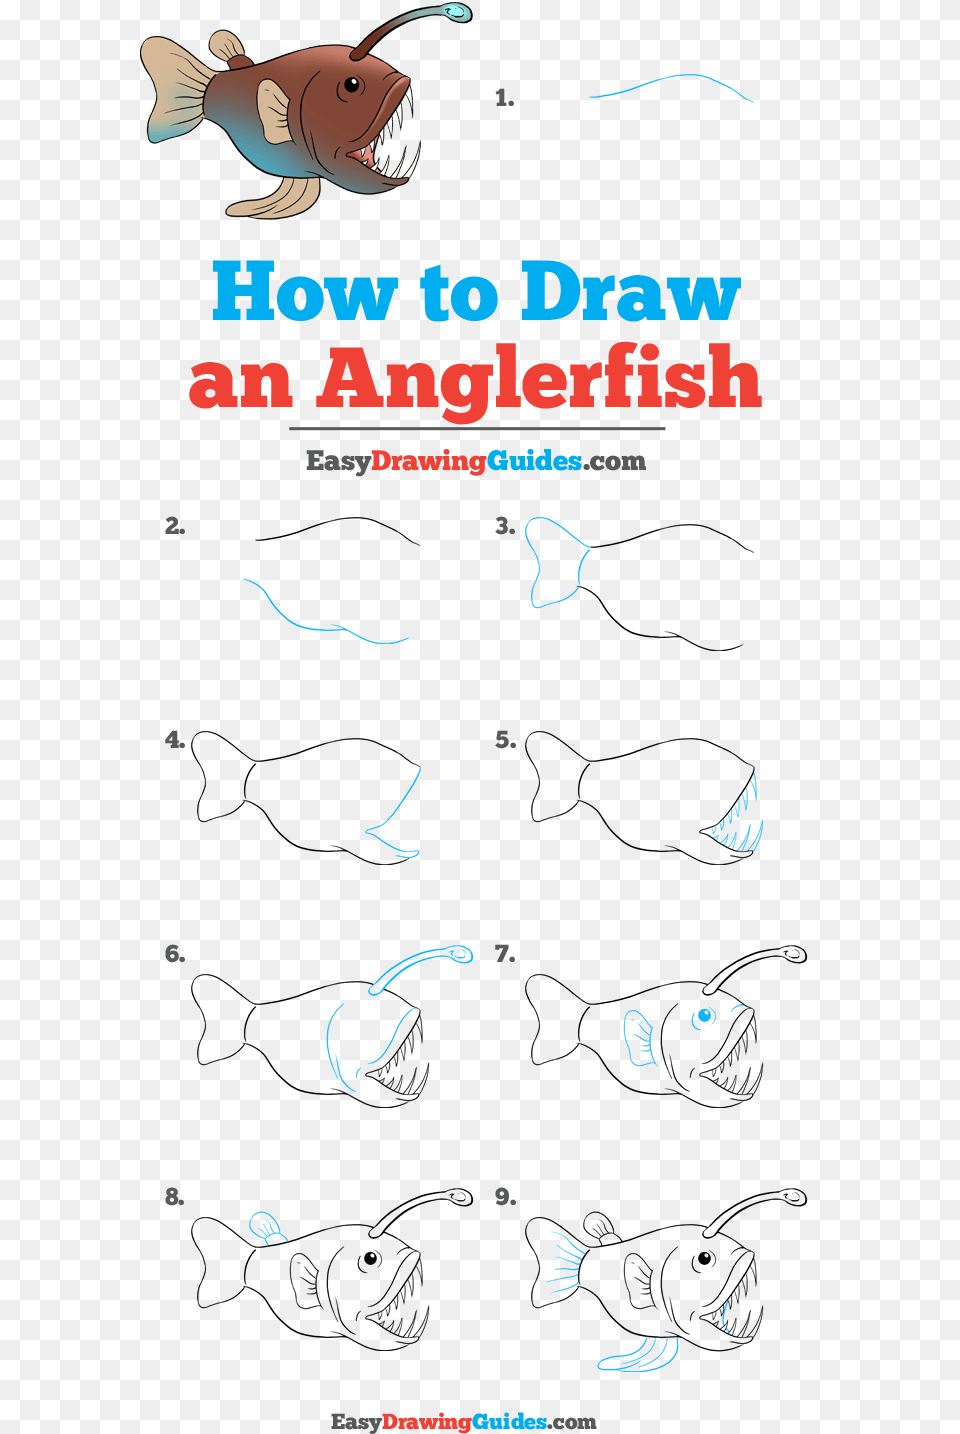 How To Draw Angler Fish Creative Words, Animal, Sea Life, Outdoors, Nature Png